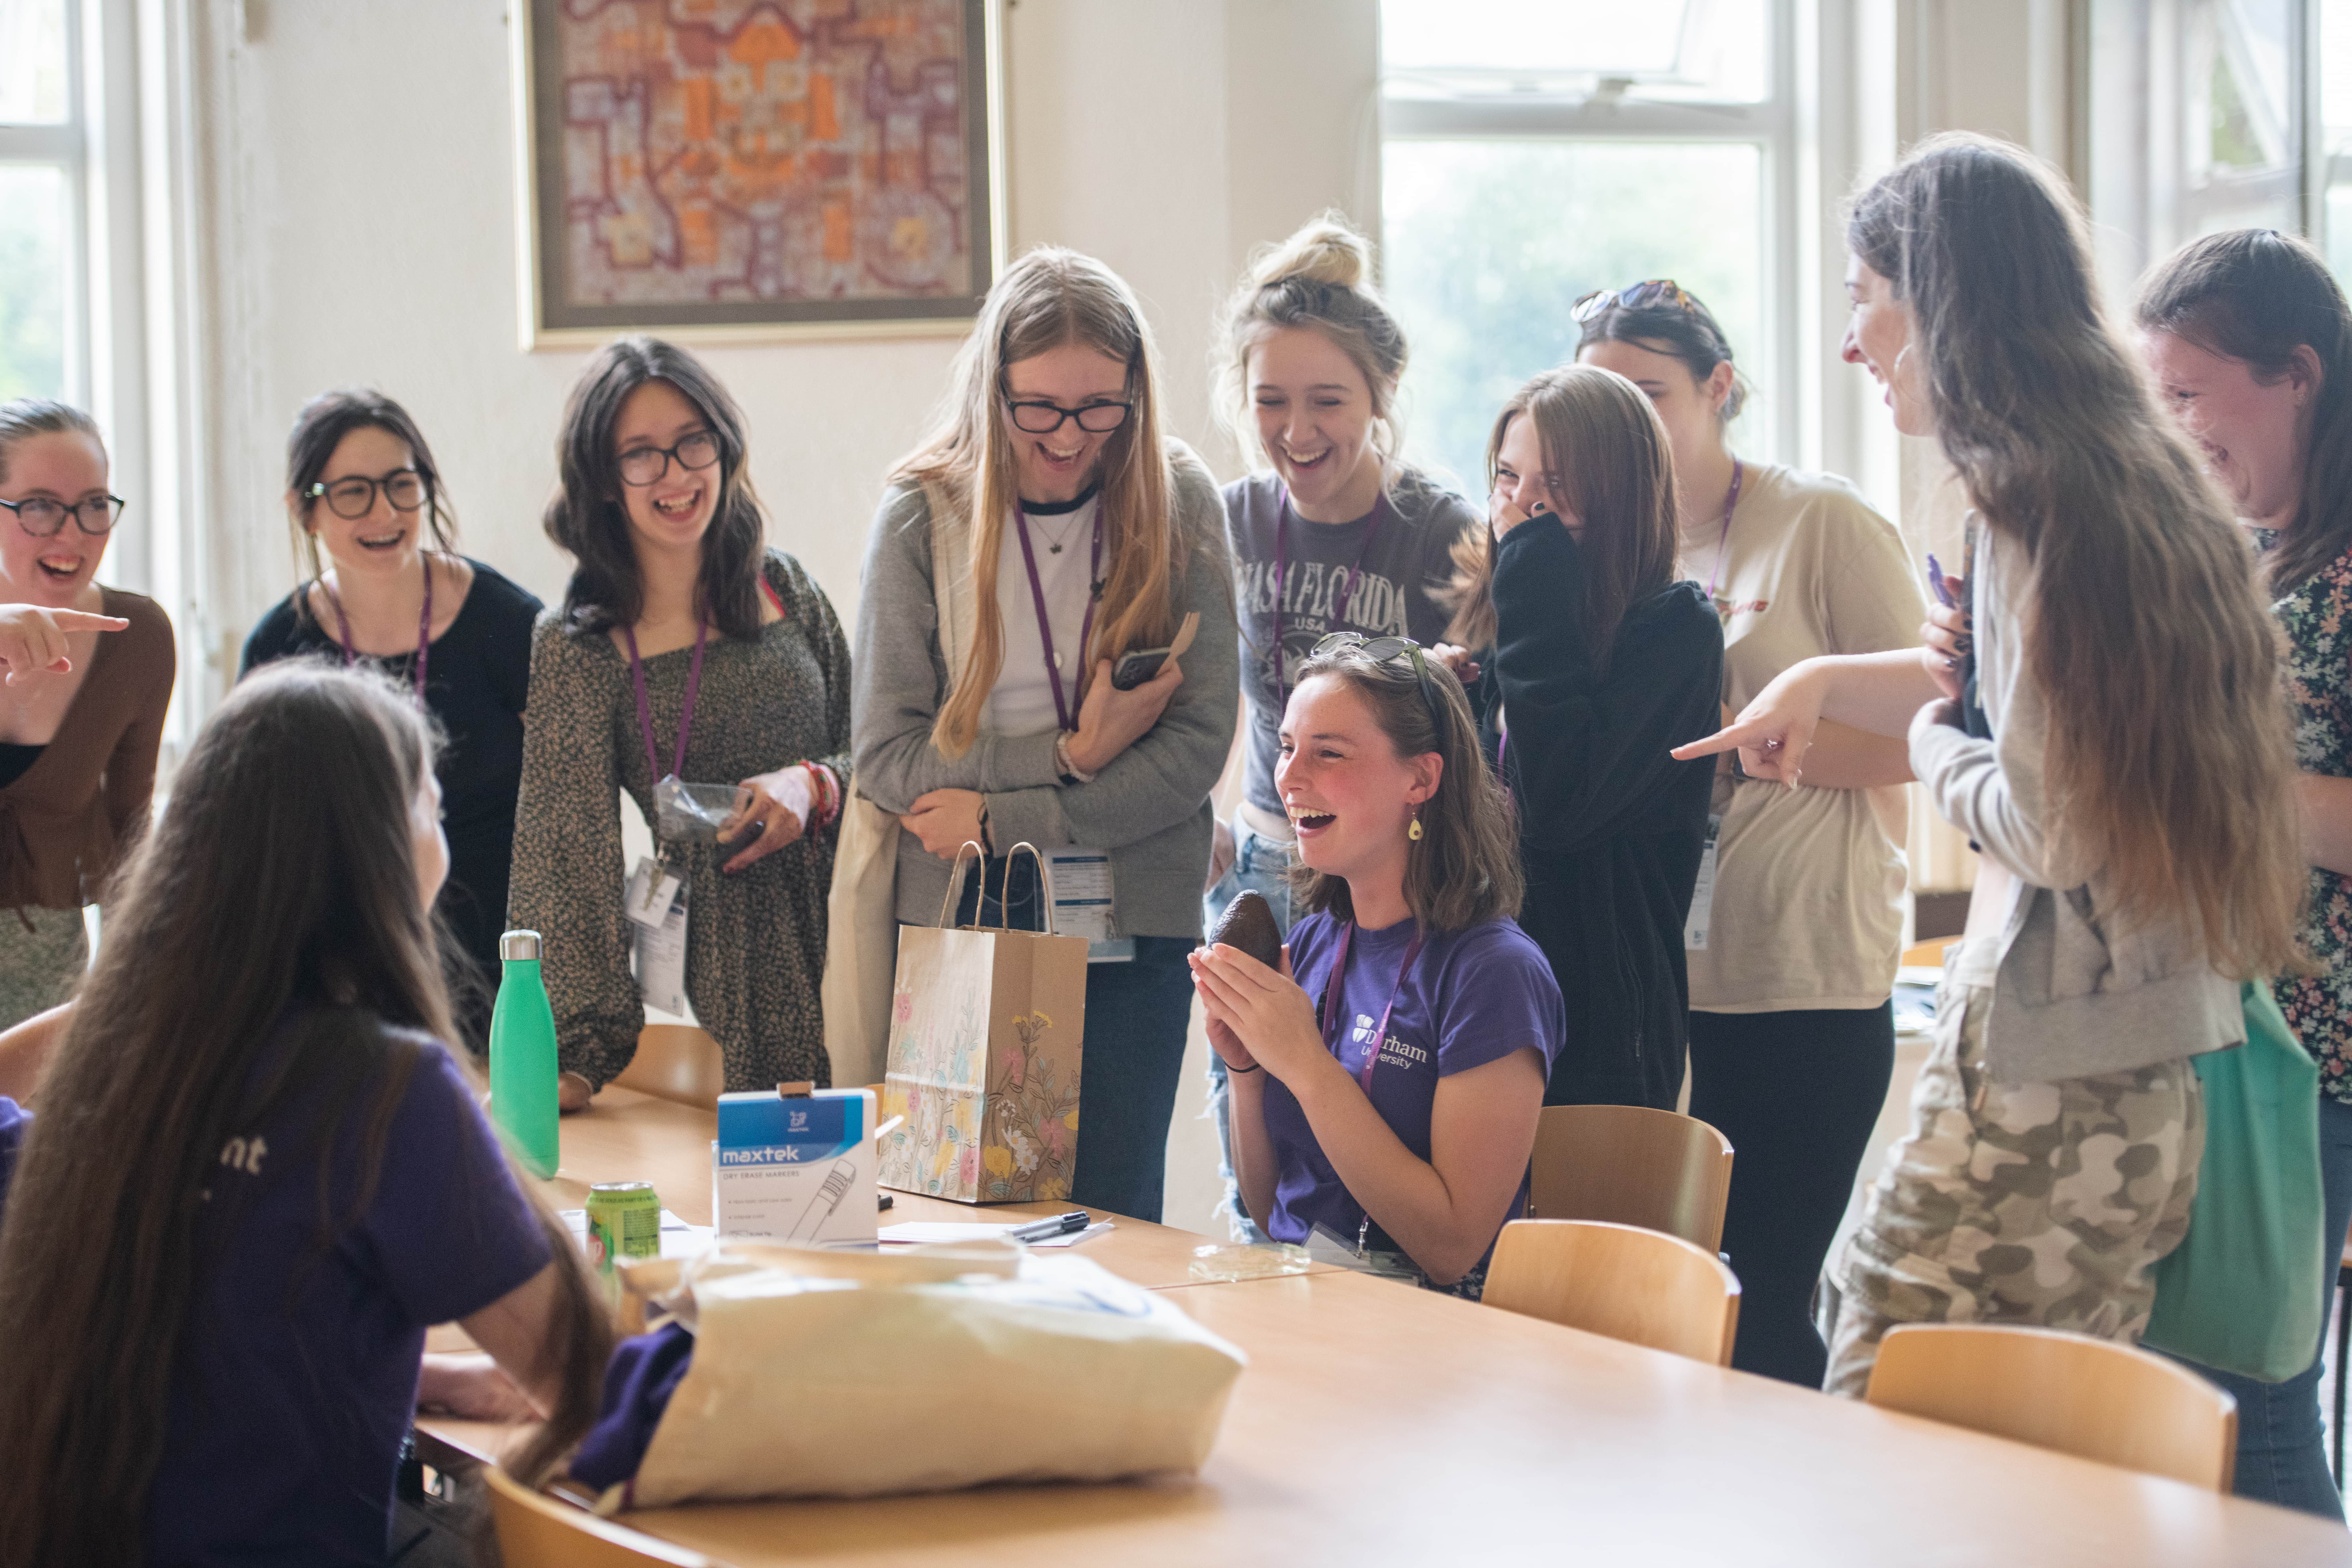 A group of laughing and smiling students huddled round a student ambassador wearing avocado earrings holding a gift of an avocado